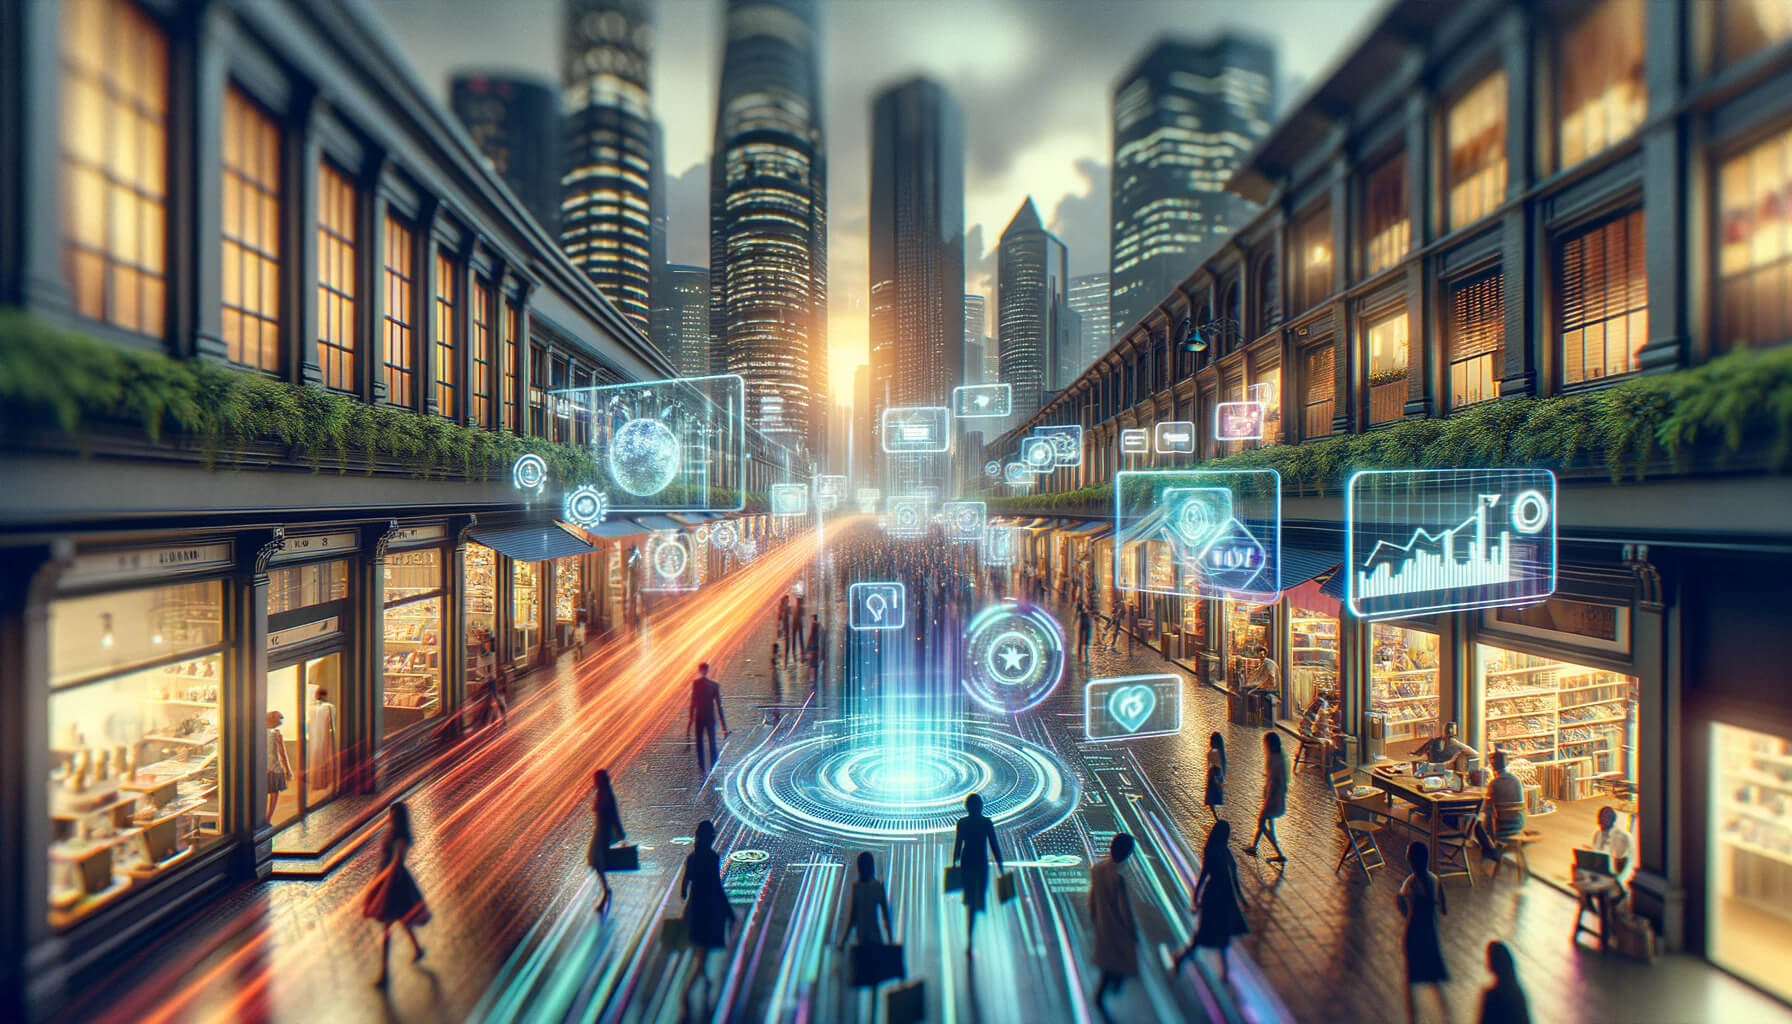 A vibrant and futuristic cityscape at sunset, with holographic data and icons overlaying the scene. People walk through a marketplace, surrounded by holograms of technological and financial symbols, while streaks of light suggest a dynamic and digital atmosphere.